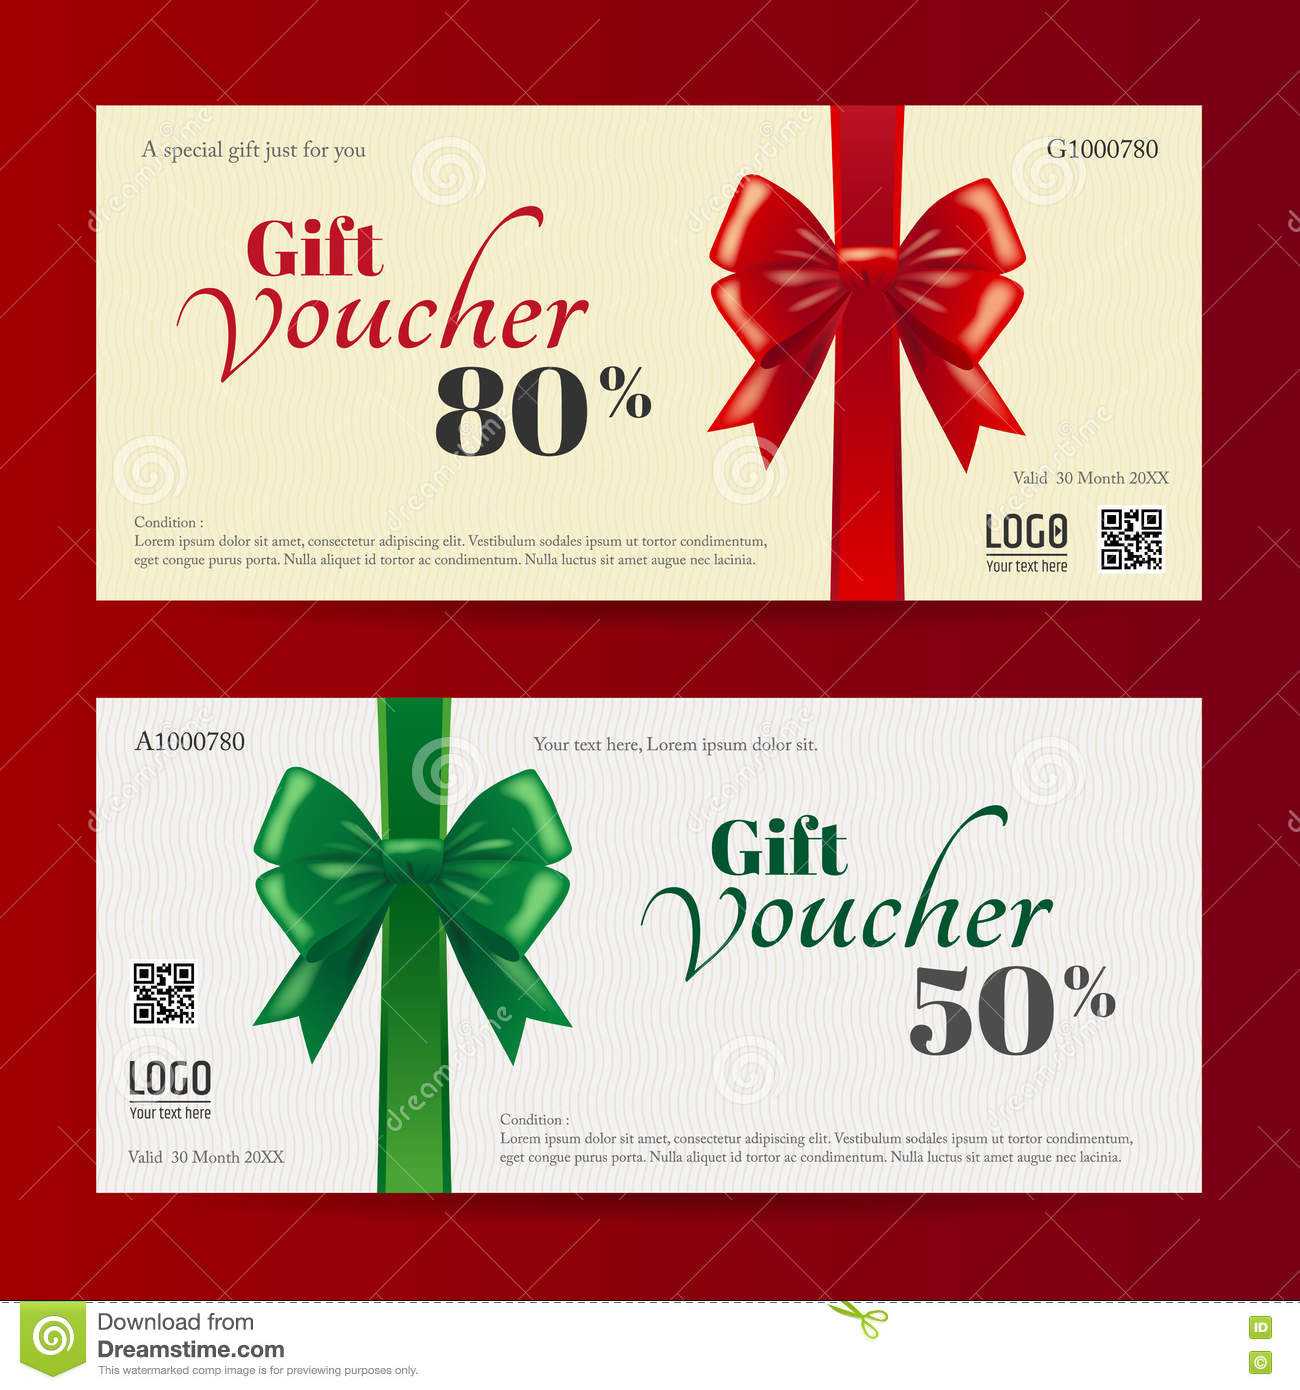 Elegant Christmas Gift Card Or Gift Voucher Template Stock Pertaining To Merry Christmas Gift Certificate Templates